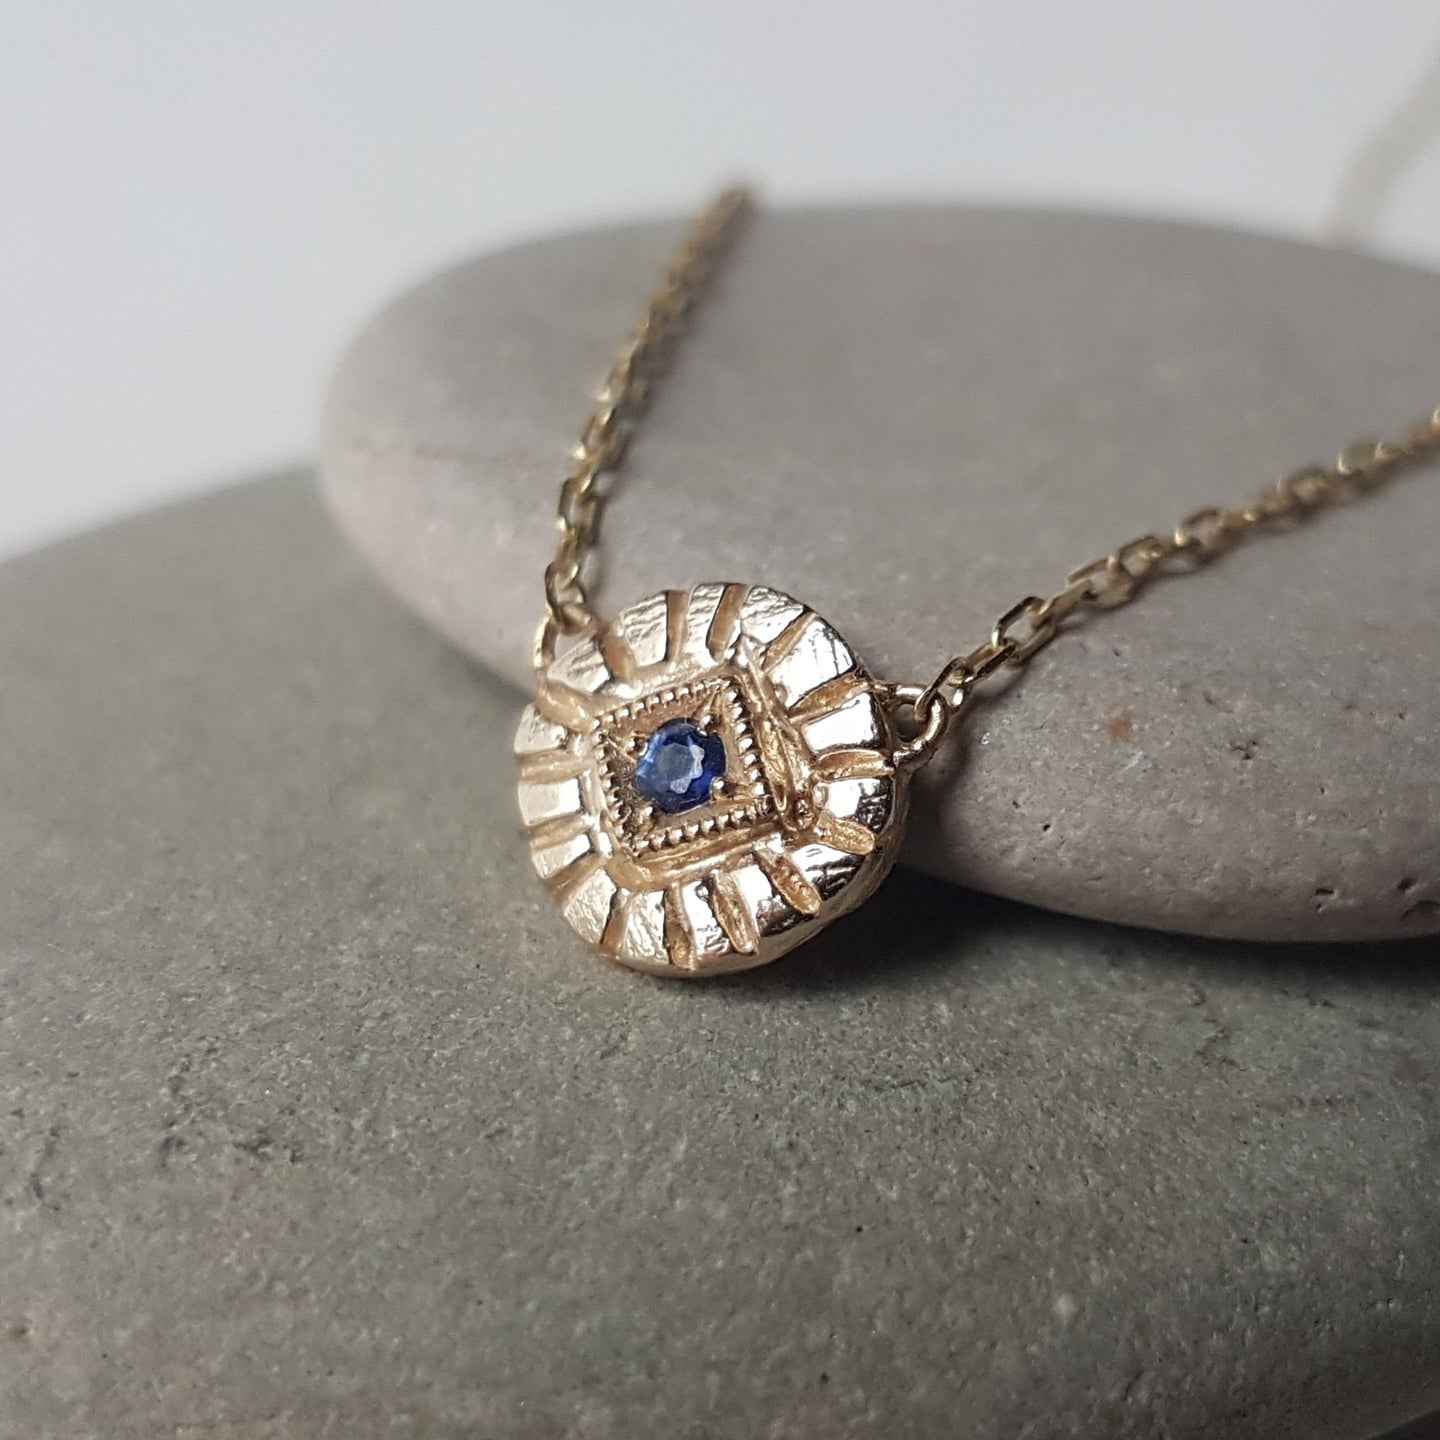 Evil Eye Necklace in Blue Sapphire and 10k Yellow Gold